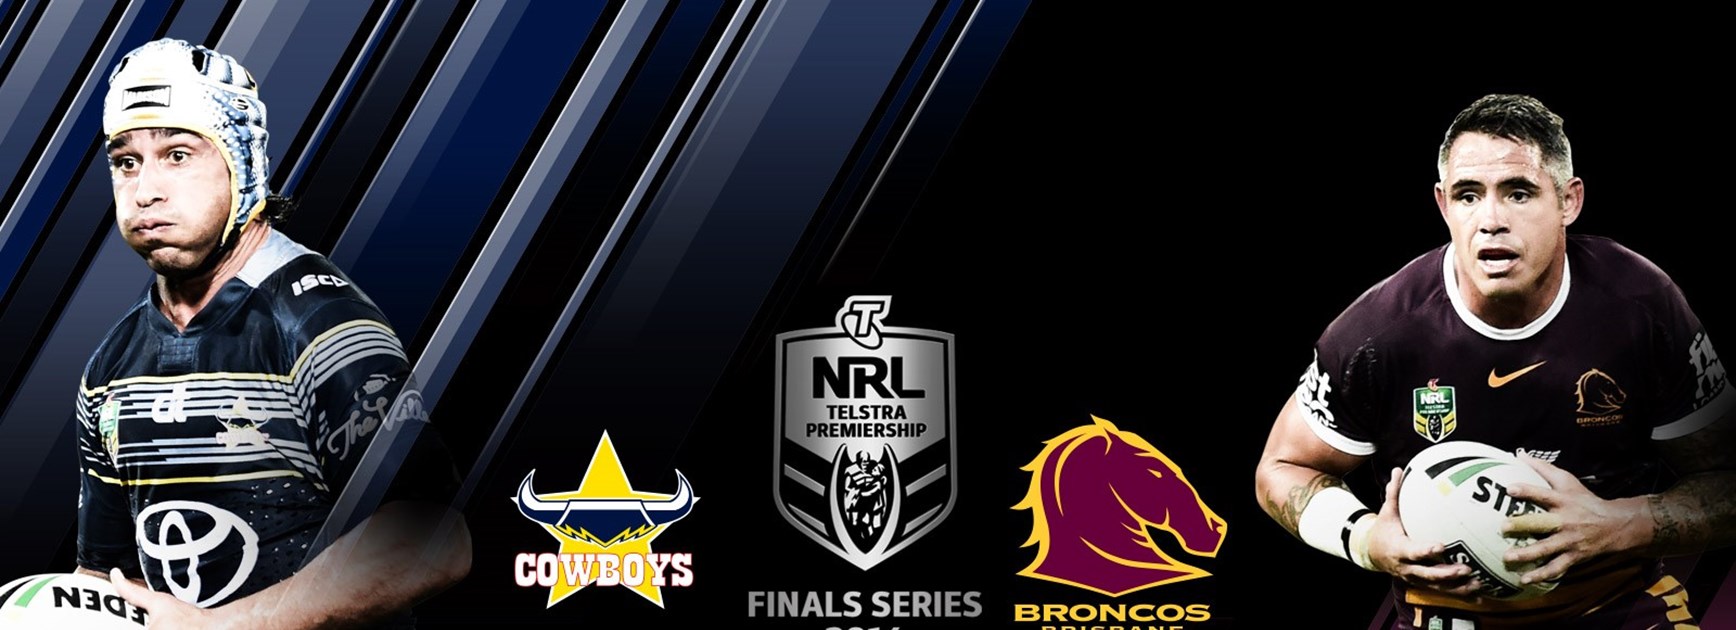 North Queensland Cowboys and Brisbane Broncos go head-to-head in an NRL semi-final in Townsville.